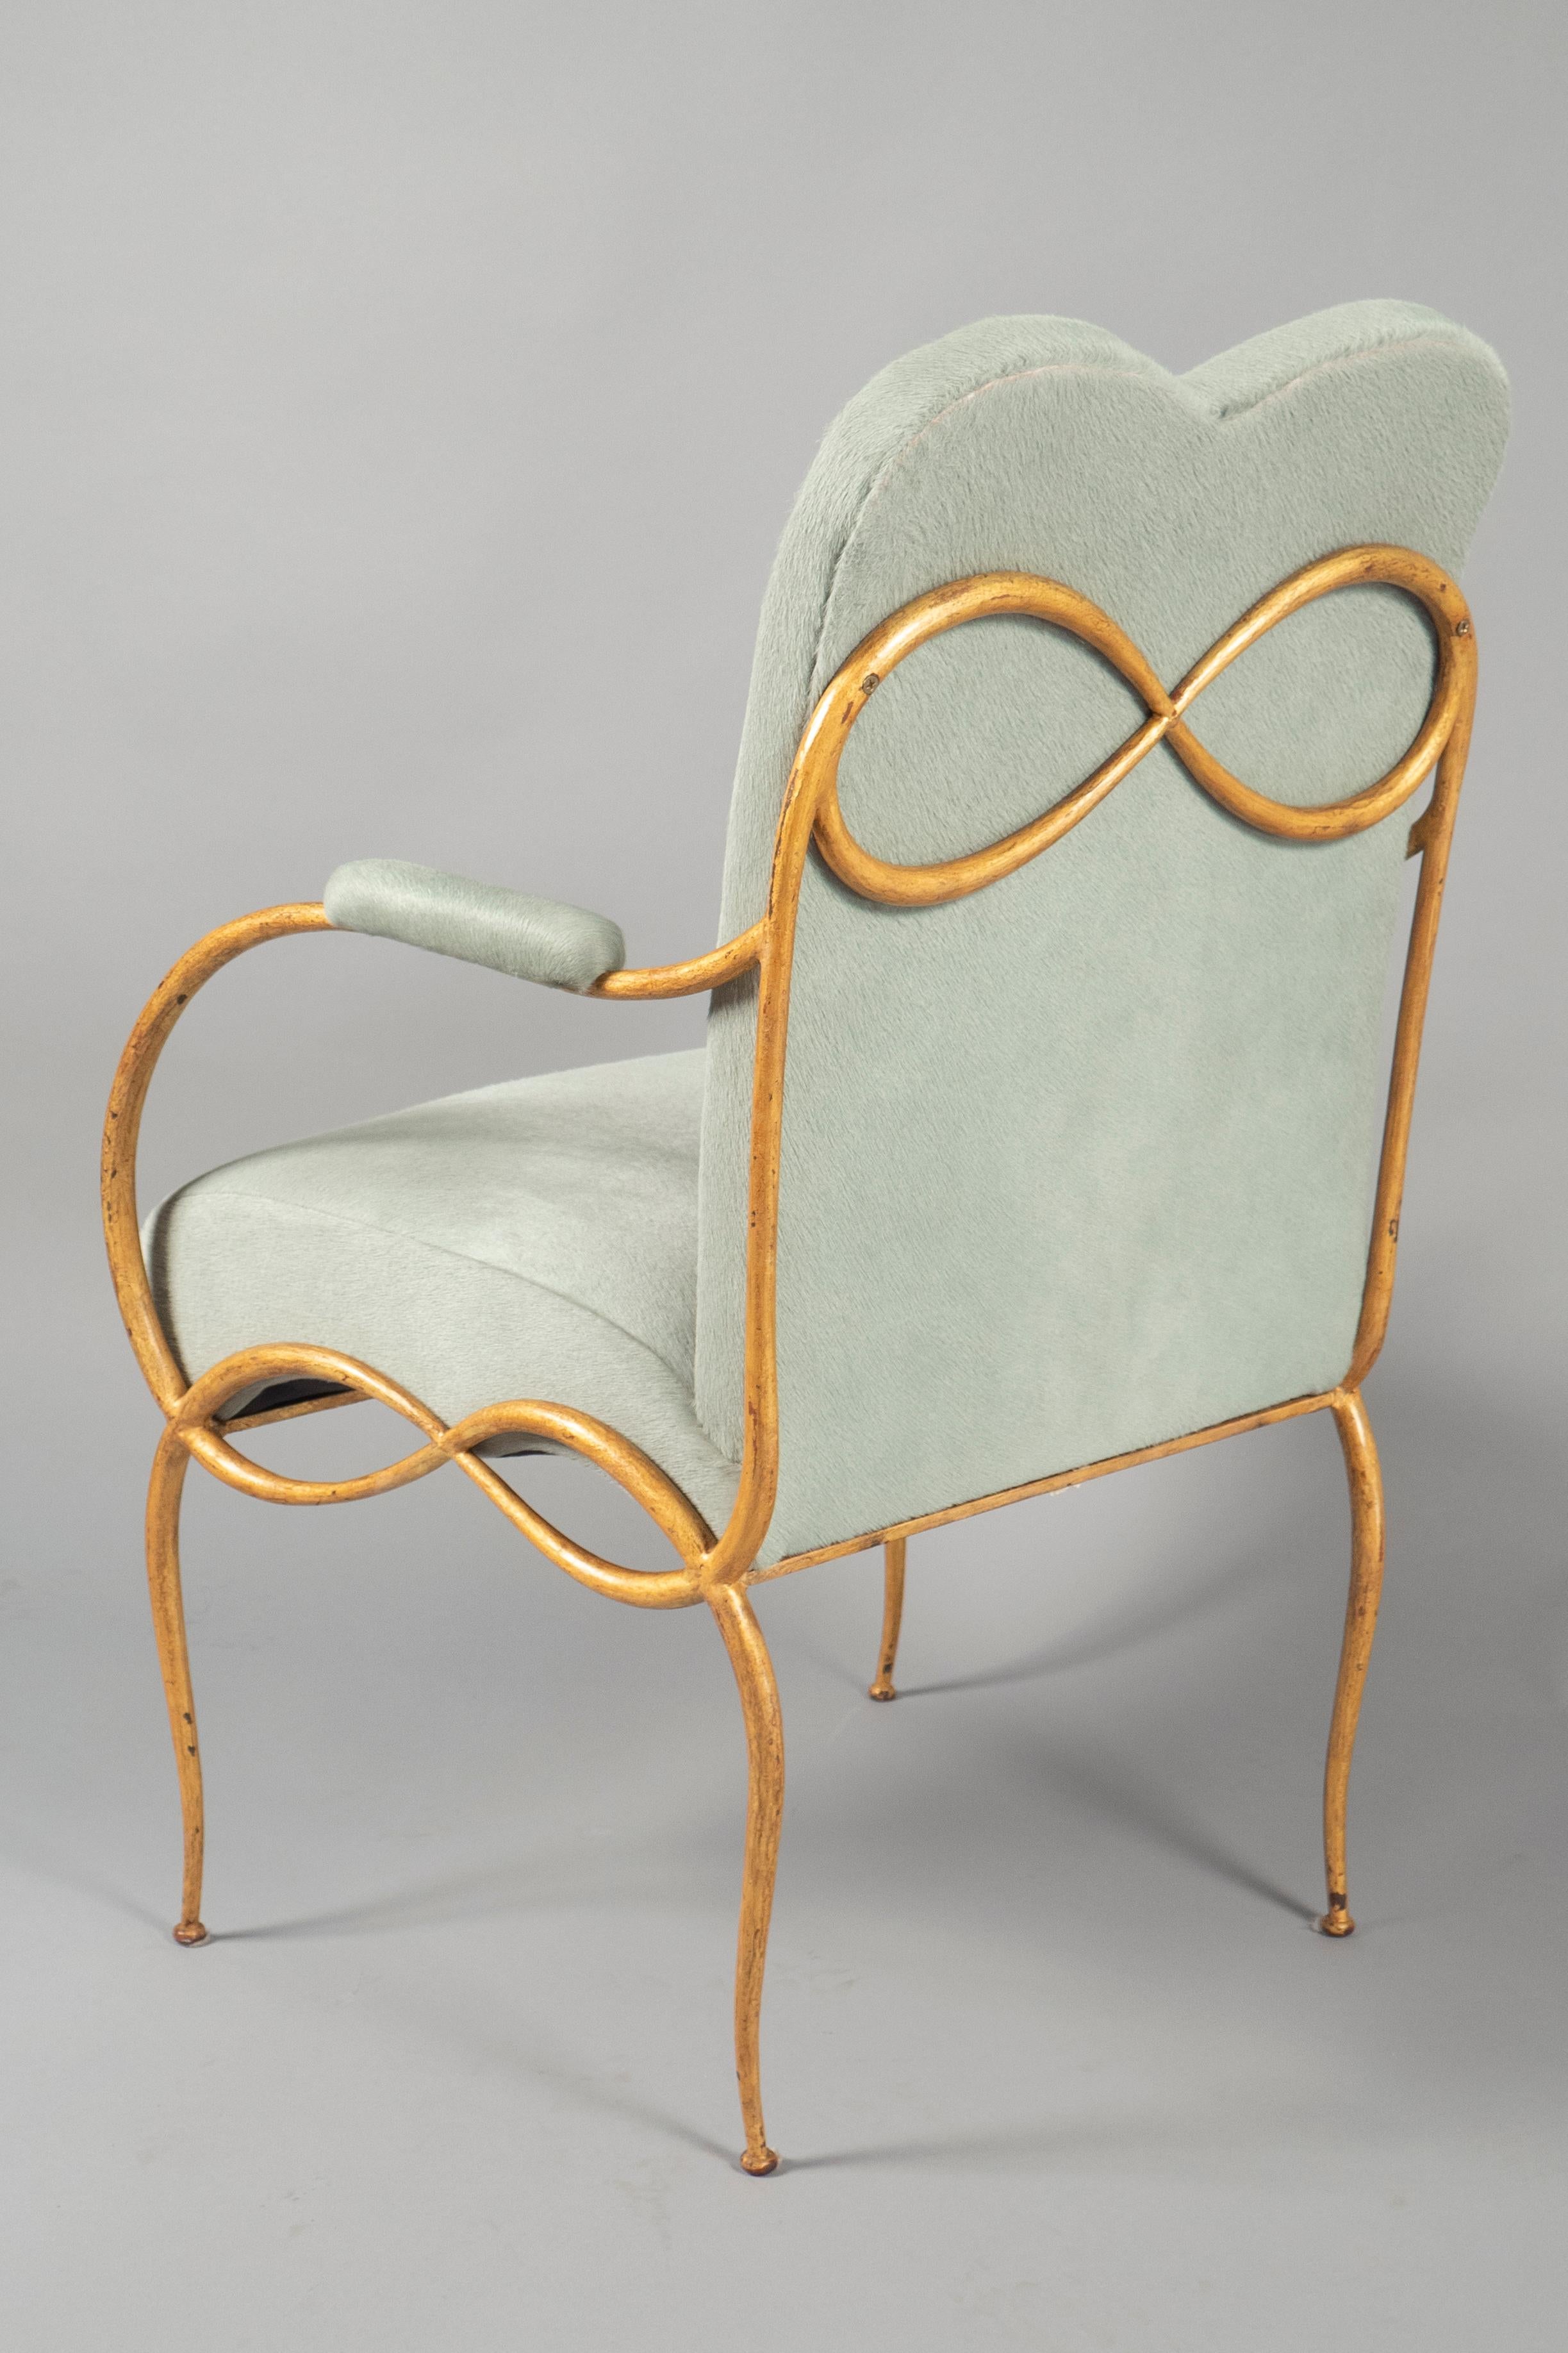 Gilded bronze tendril frame with a double-arched back and upholstered armrests. Literature: A Bony’s Furniture and Interiors of the 1940s, Fammarion, 2003, page 78, model illustrated.
 